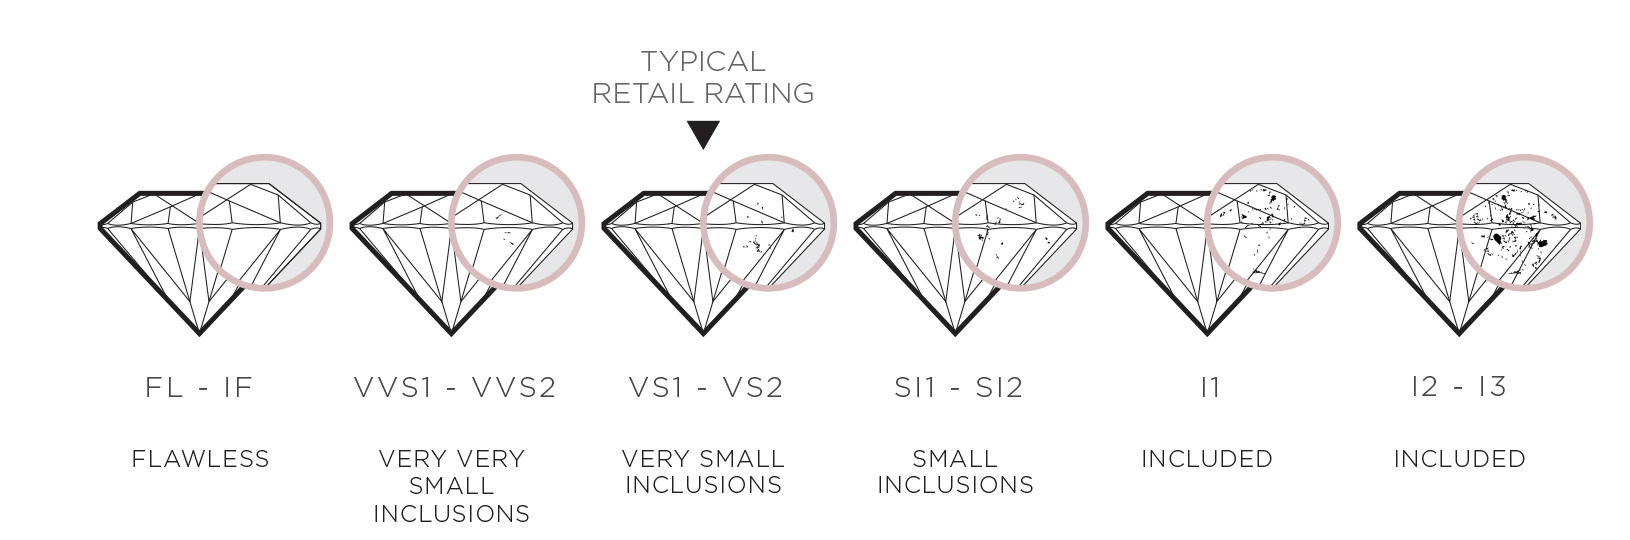 An infographic showing the diamond clarity scale